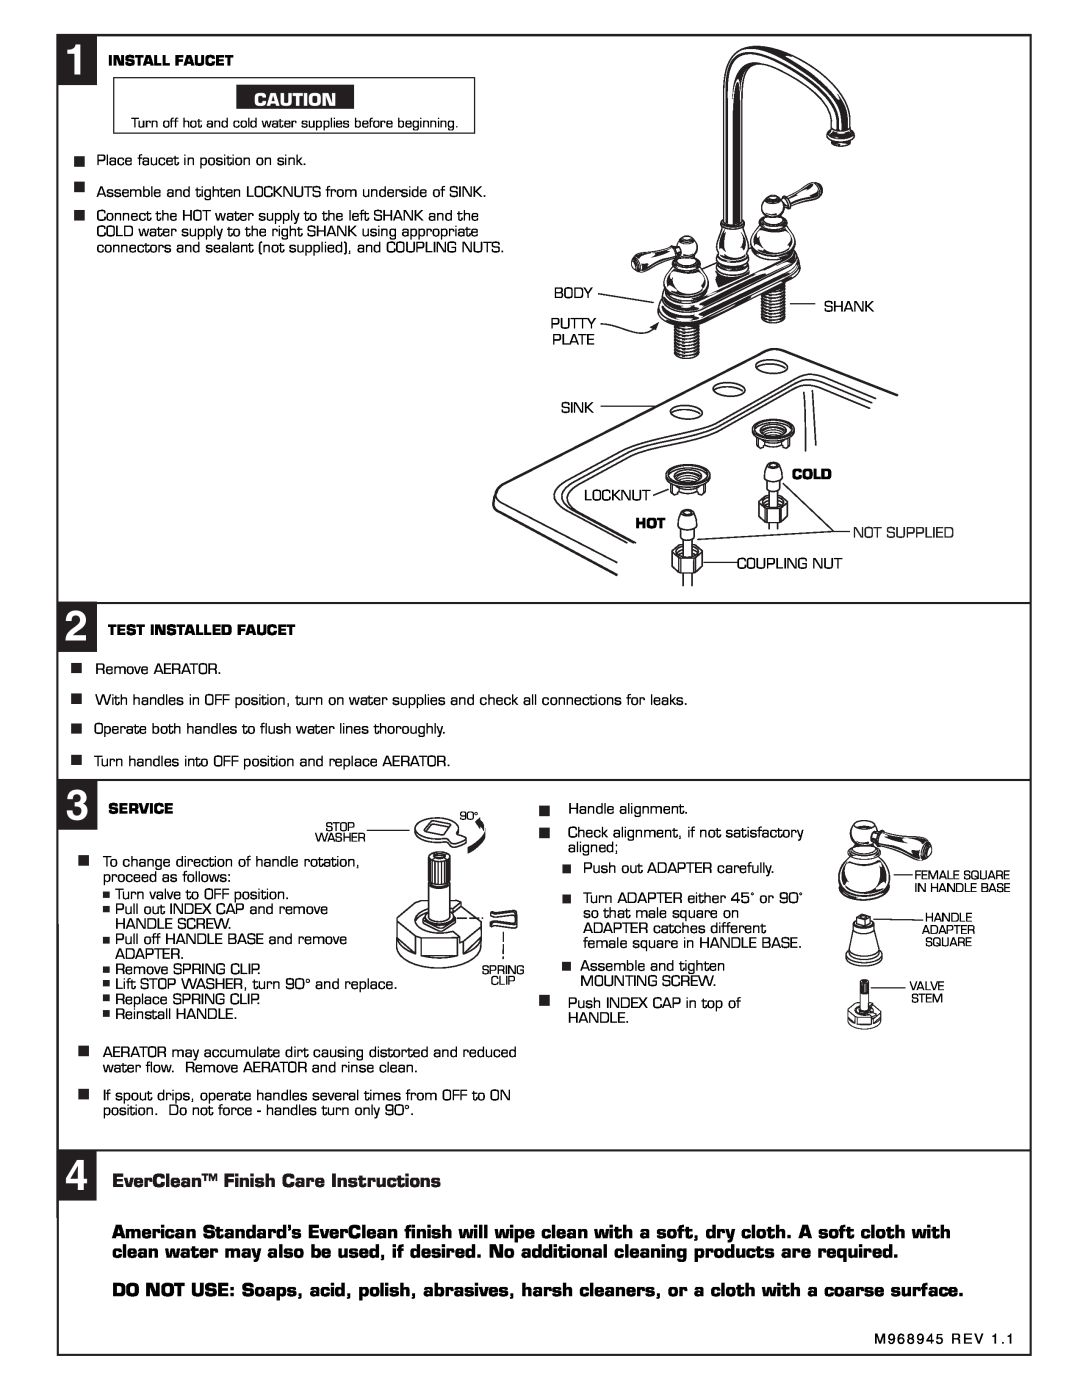 American Standard 2770.702 Series EverClean Finish Care Instructions, Install Faucet, Cold, Test Installed Faucet, Service 